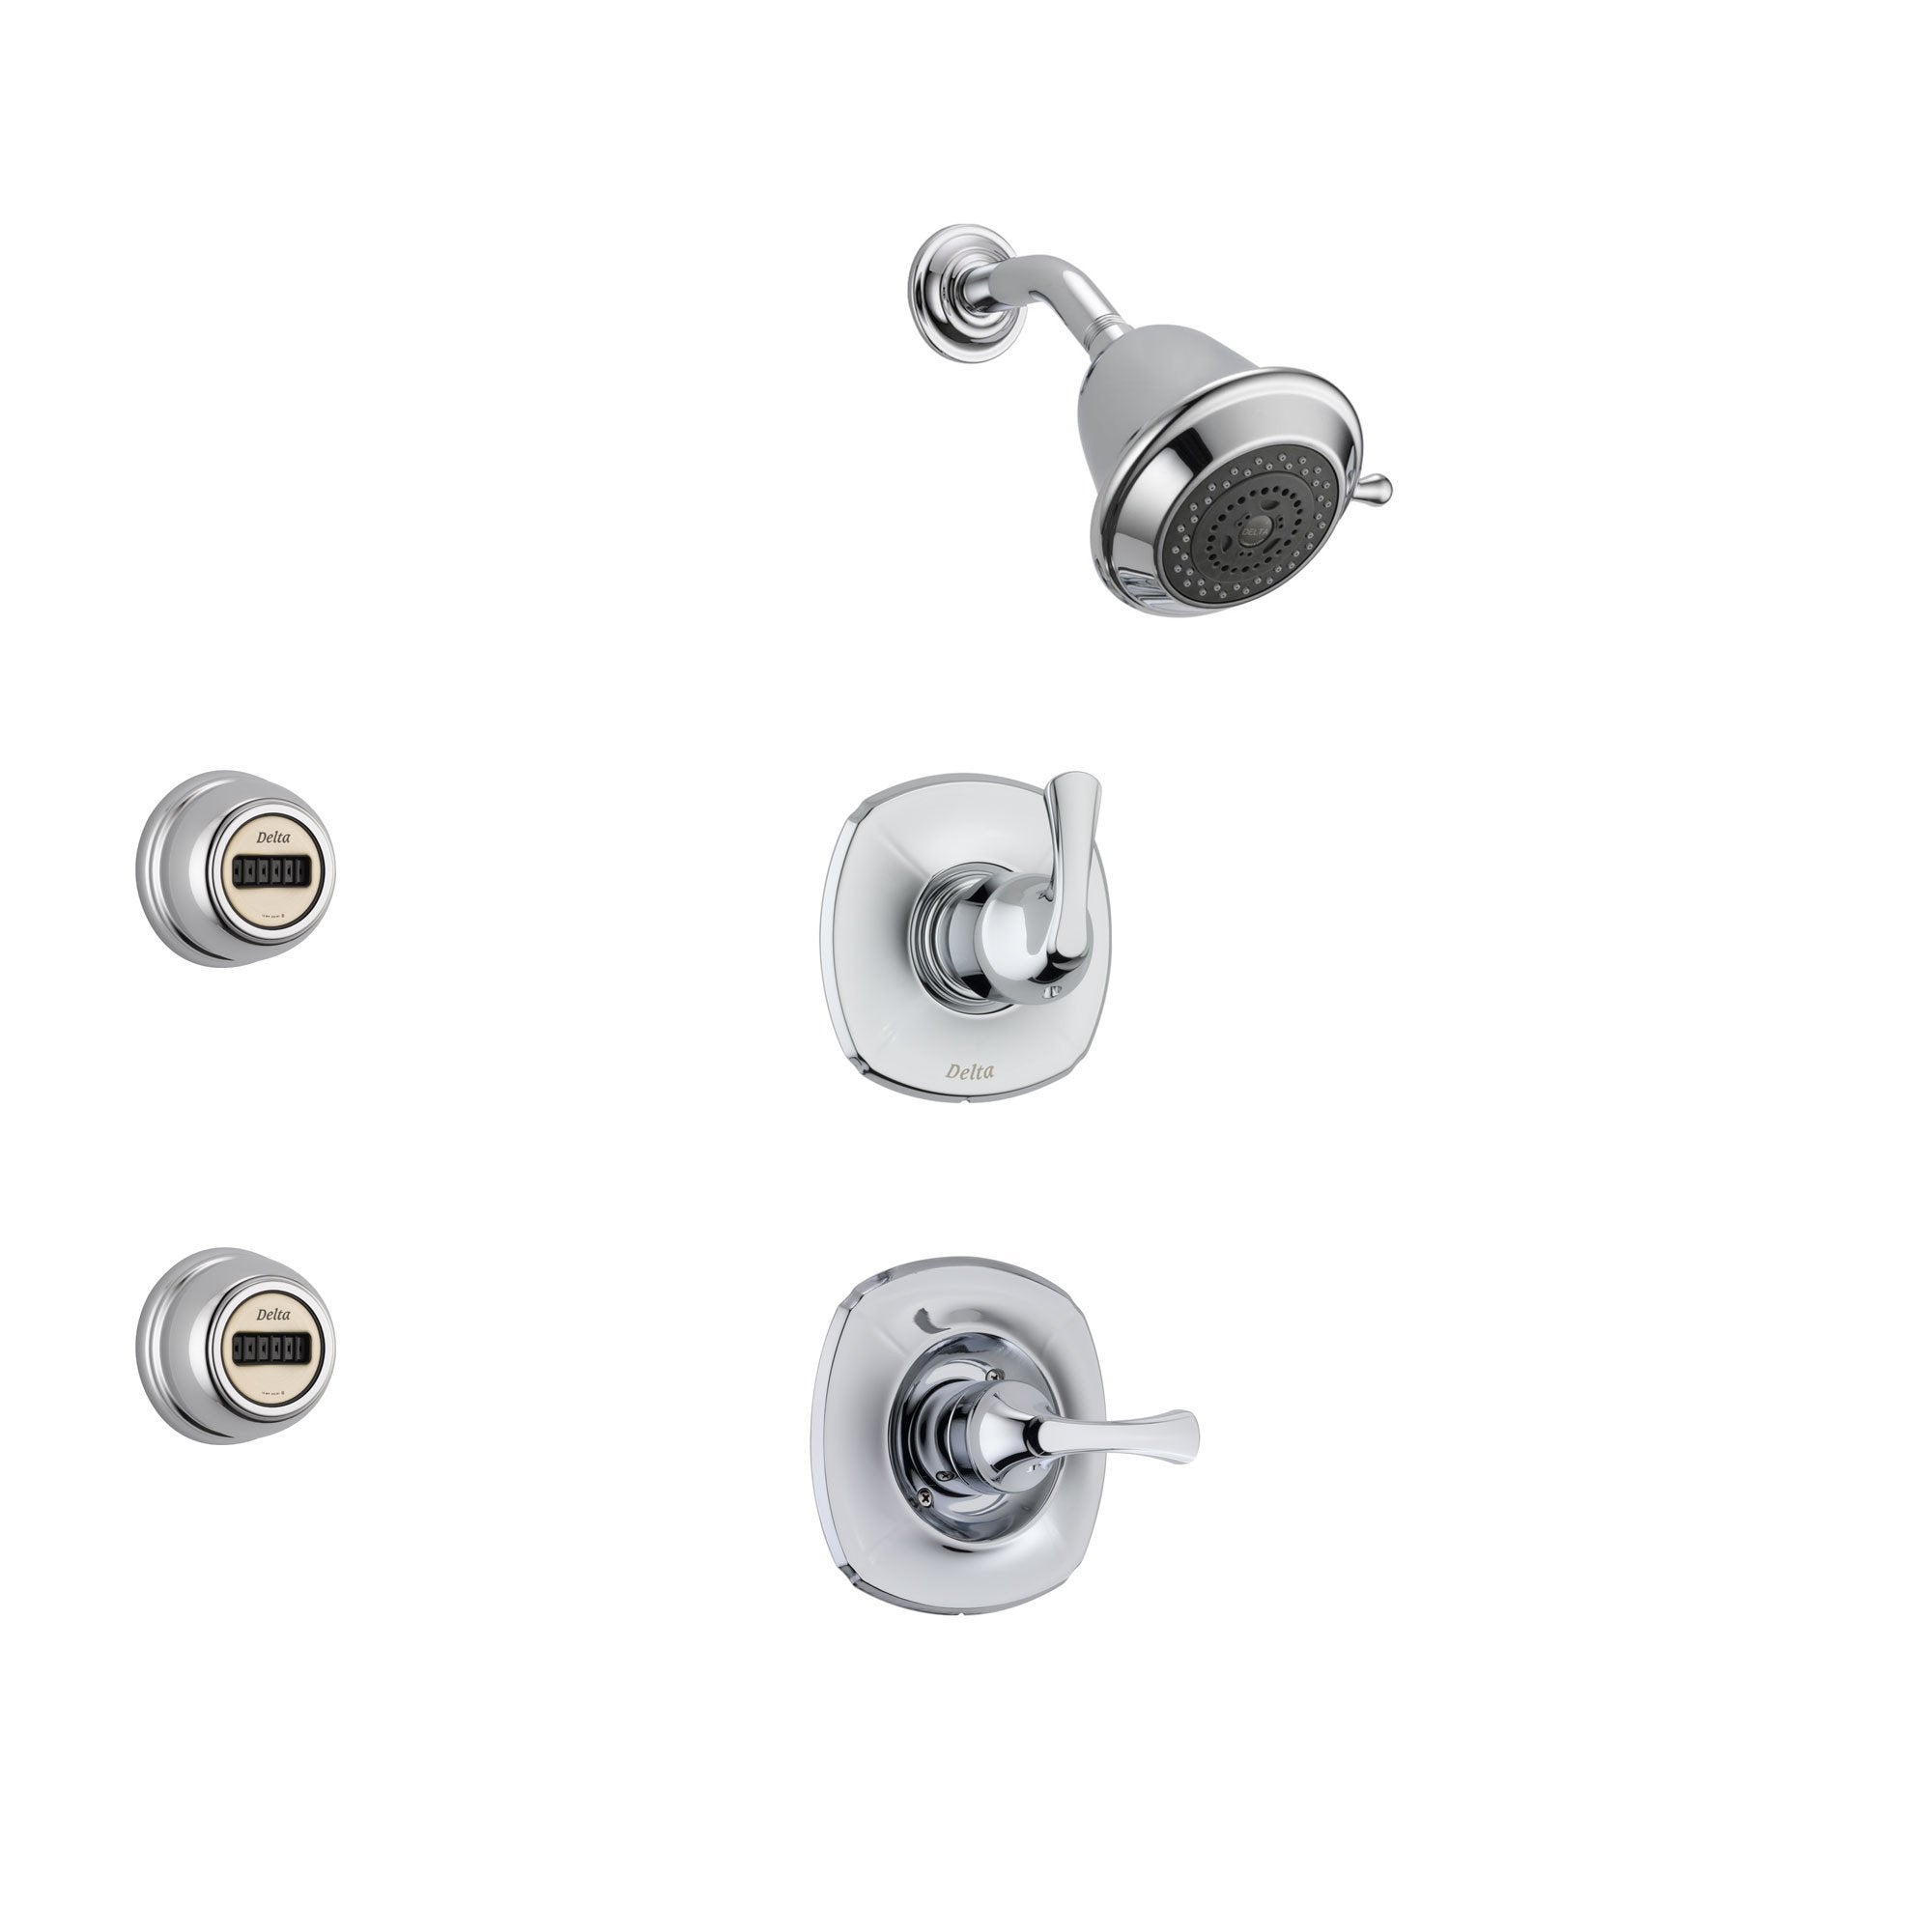 Delta Addison Chrome Shower System with Normal Shower Handle, 3-setting Diverter, Showerhead, and 2 Body Sprays SS149285